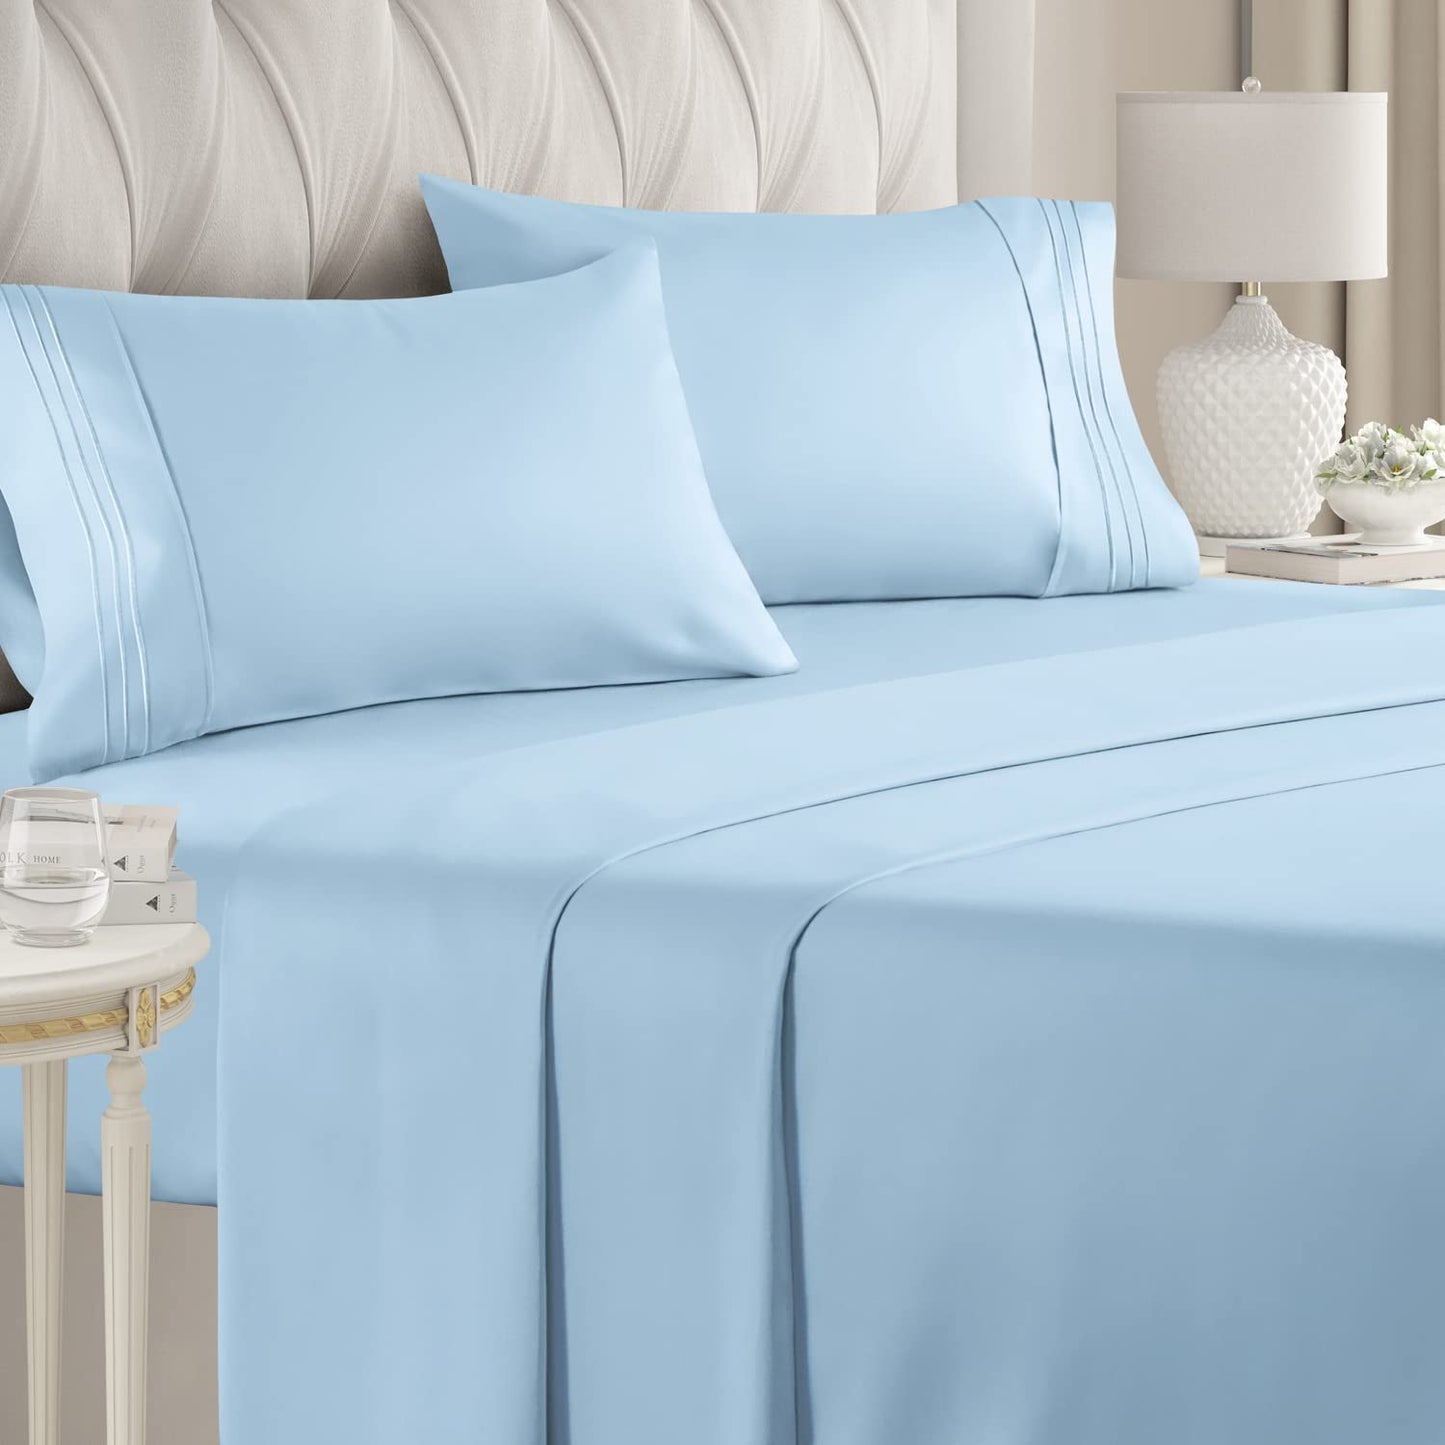 Buy Full Size Flat Sheet Blue Egyptian Cotton 1000 Thread Count at- Egyptianhomelinens.com